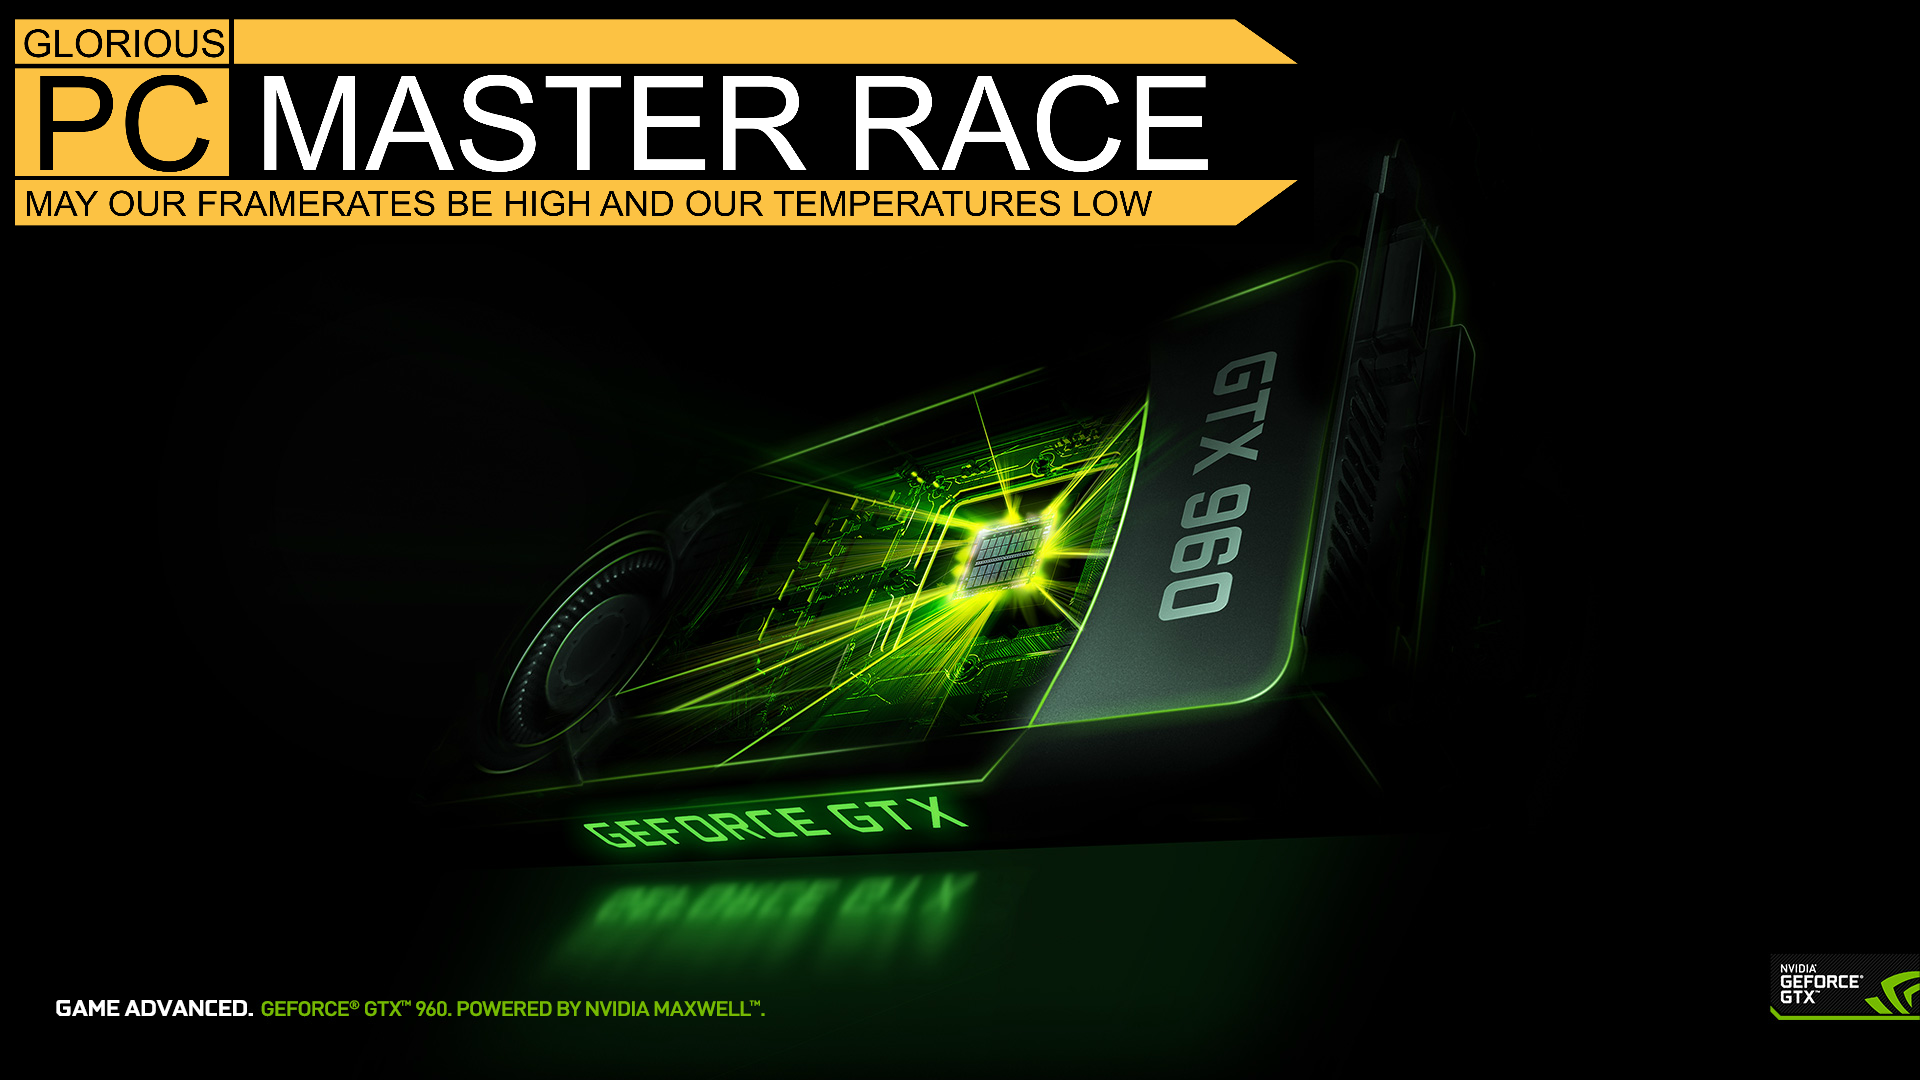 Pc Master Race Wallpaper For My Gtx 960 Brothers - Wallpaper , HD Wallpaper & Backgrounds